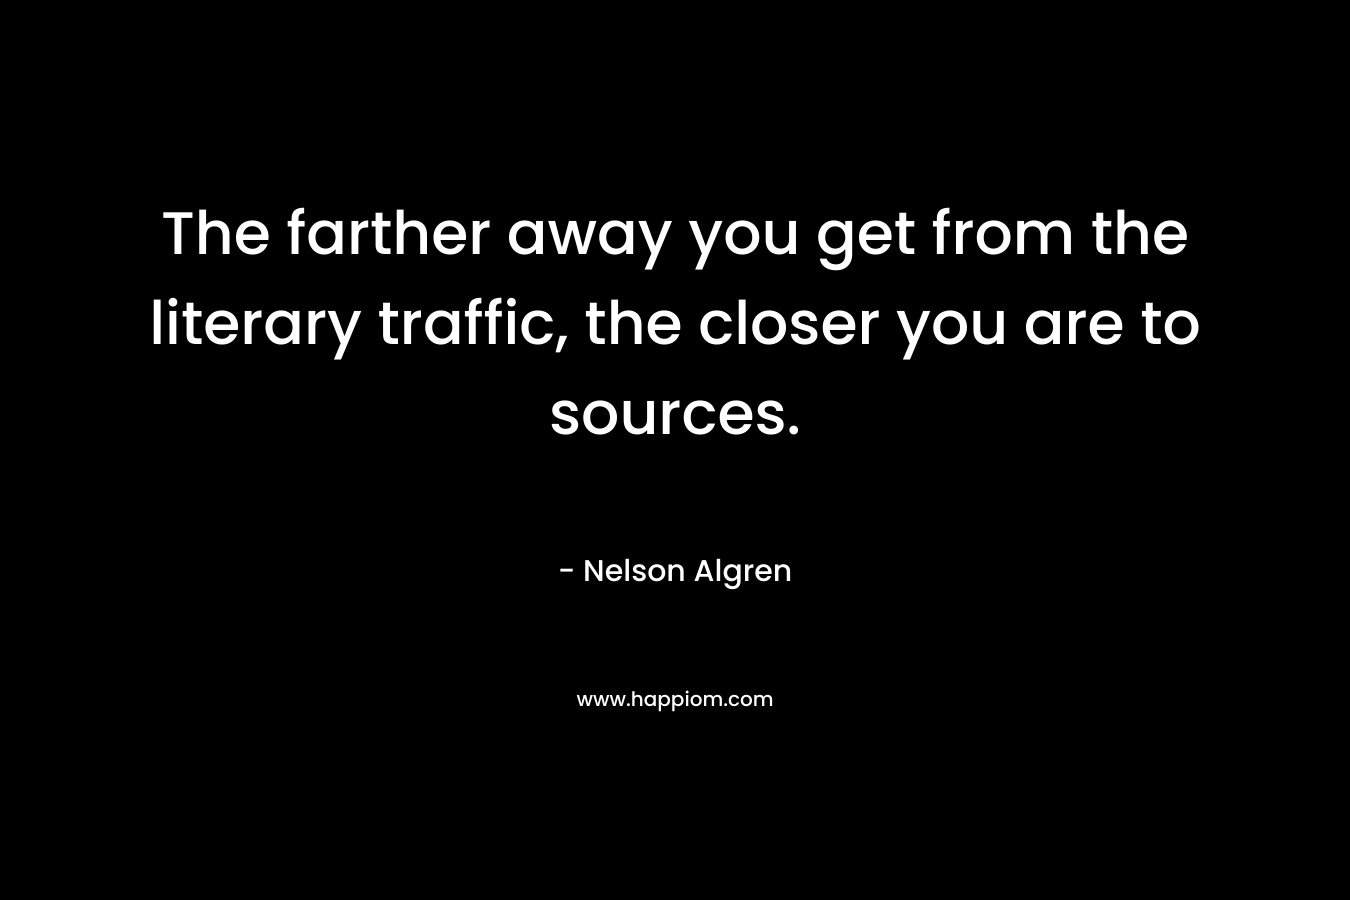 The farther away you get from the literary traffic, the closer you are to sources. – Nelson Algren